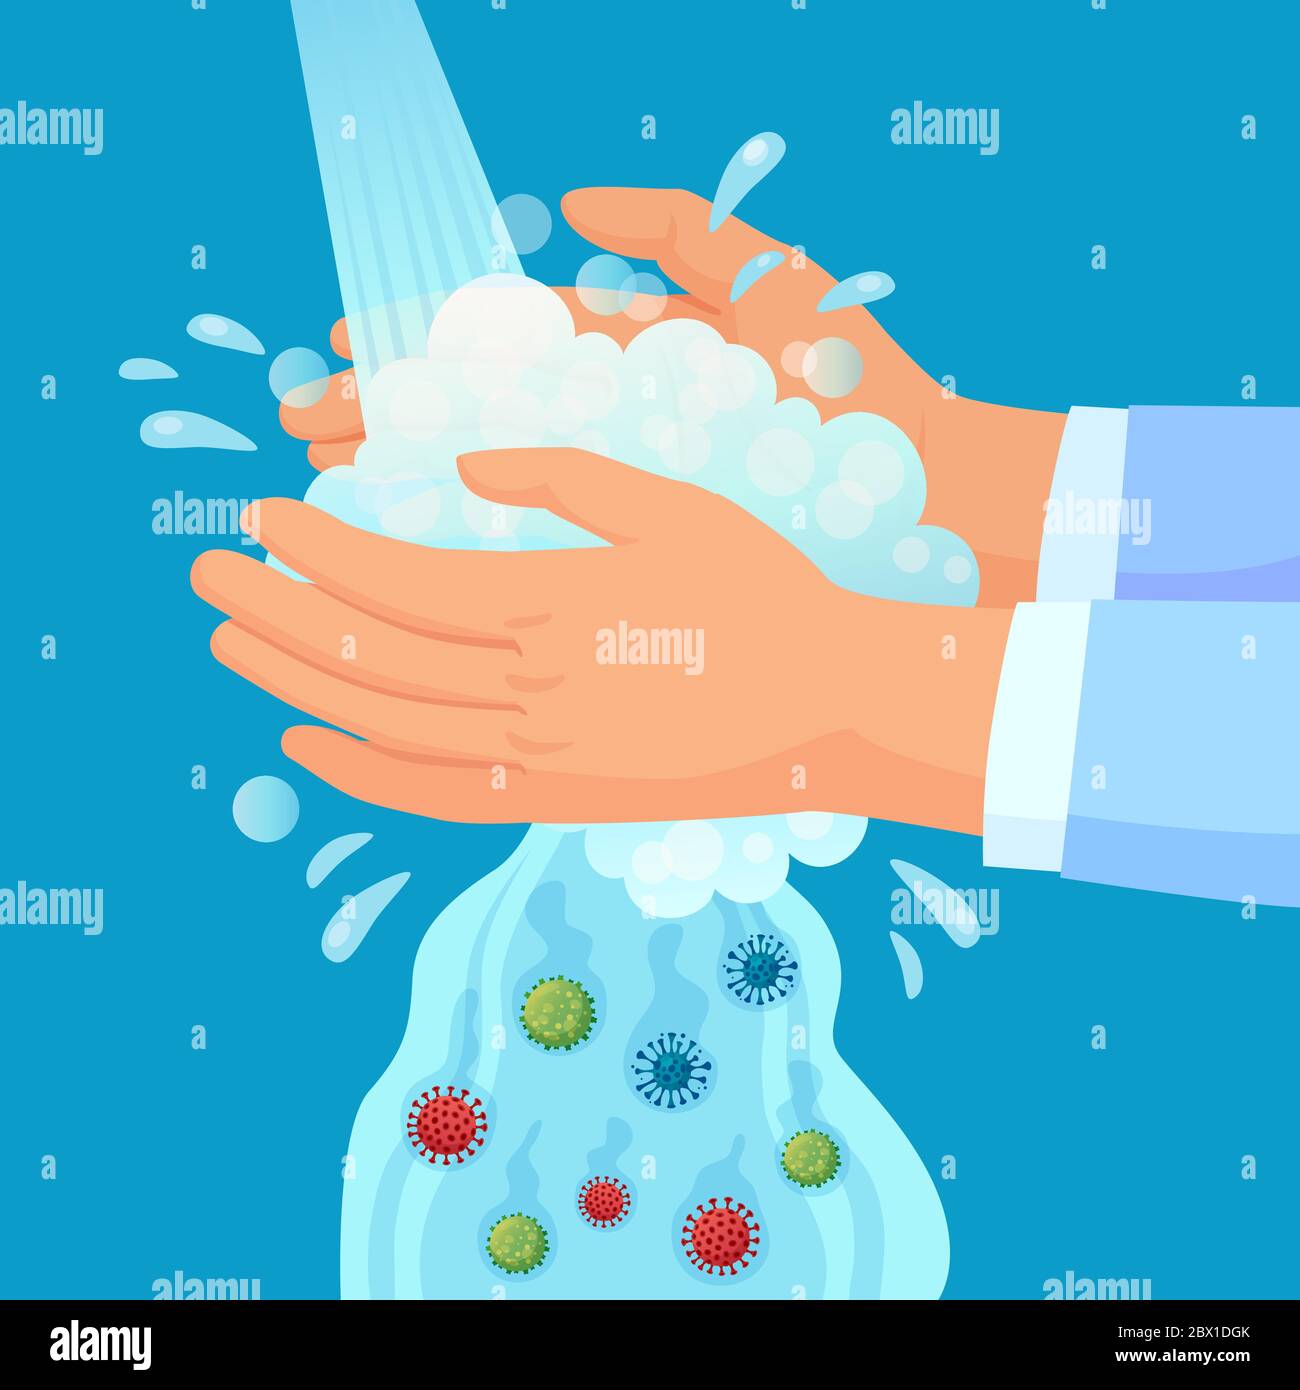 Hand washing. Personal hygiene propaganda, washing hands with soap under faucet with germs falling down. Covid virus prevention vector concept Stock Vector